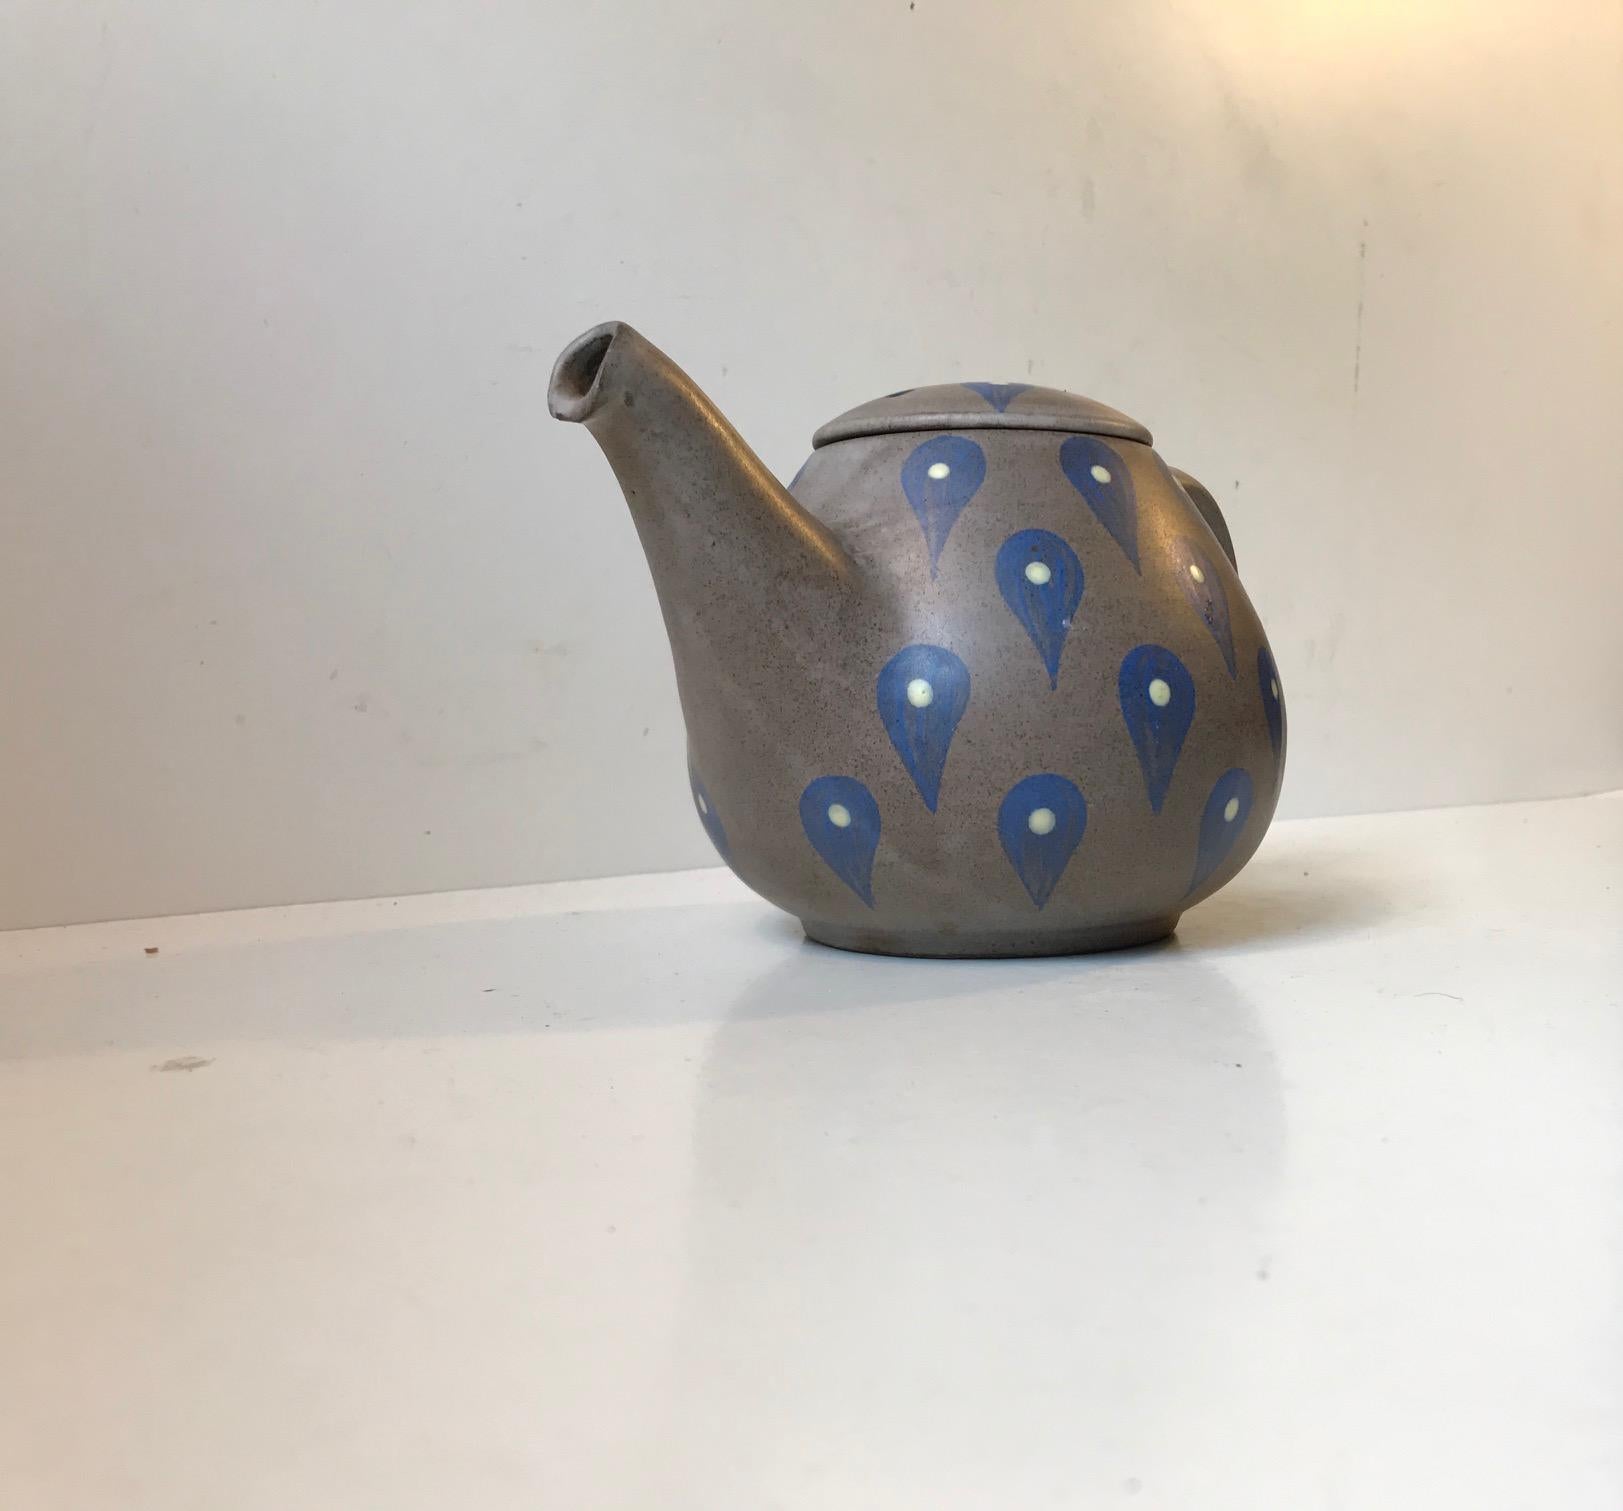 A Danish teapot decorated with hand applied blue and yellow drops on a dusty grey main-glaze. Designed and manufactured by Melle Keramik in Denmark during the 1960s. The colors and decor are unique to this studio piece. Its hand signed by the